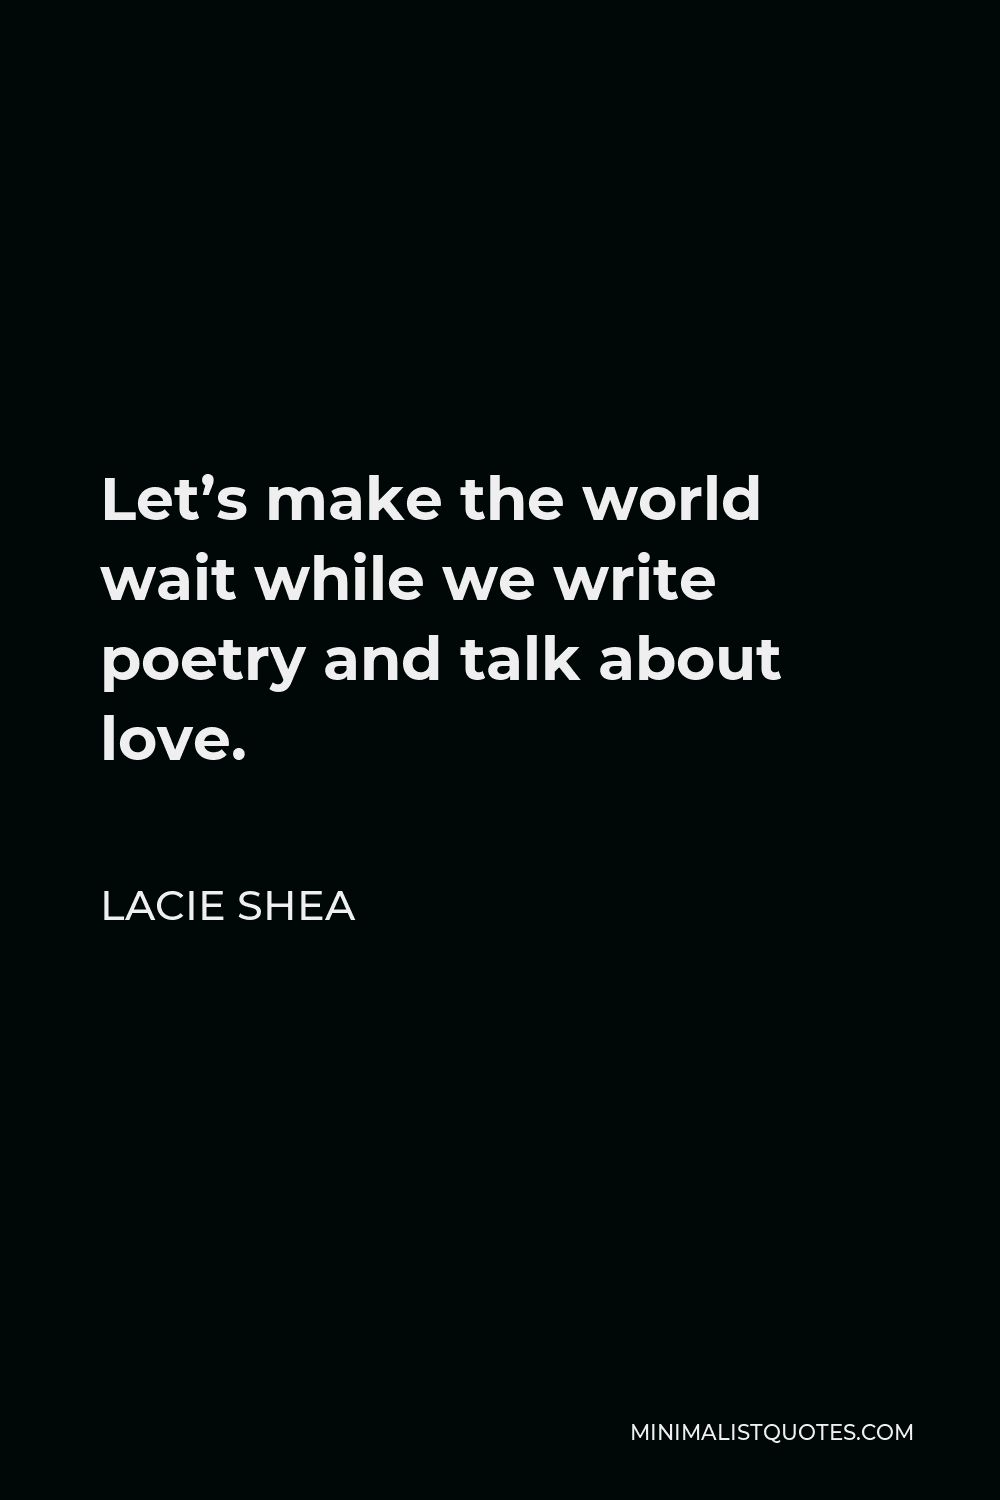 Lacie Shea Quote - Let’s make the world wait while we write poetry and talk about love.